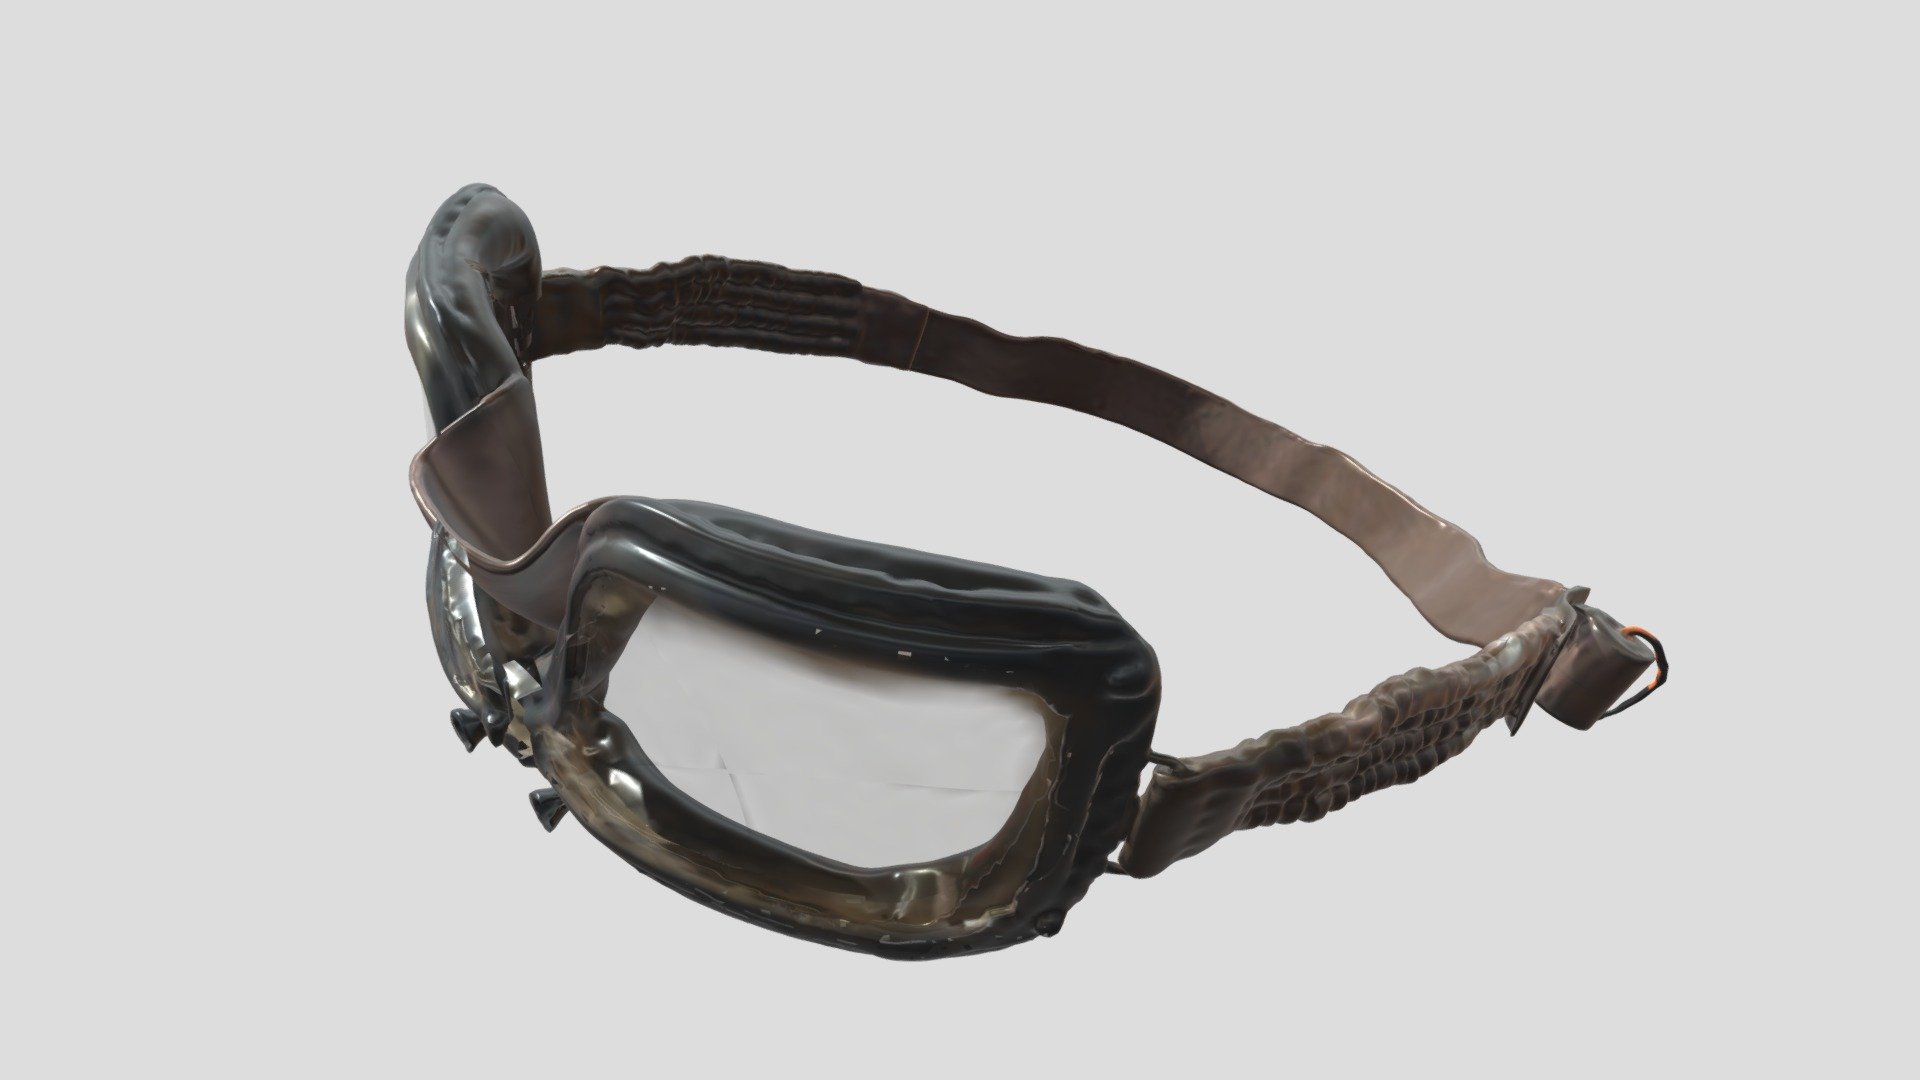 A Digital Reconstructed Goggle from historical times.
RAF Mk. III flying googles. This pattern was used during the 1930s into the early 1940s. Mk. III goggles were in use during the Battle of Britain. 
Flying goggles helped protect pilots’ eyes from glare, wind and flying debris. 

Reconstructed in Meshroom 3d model